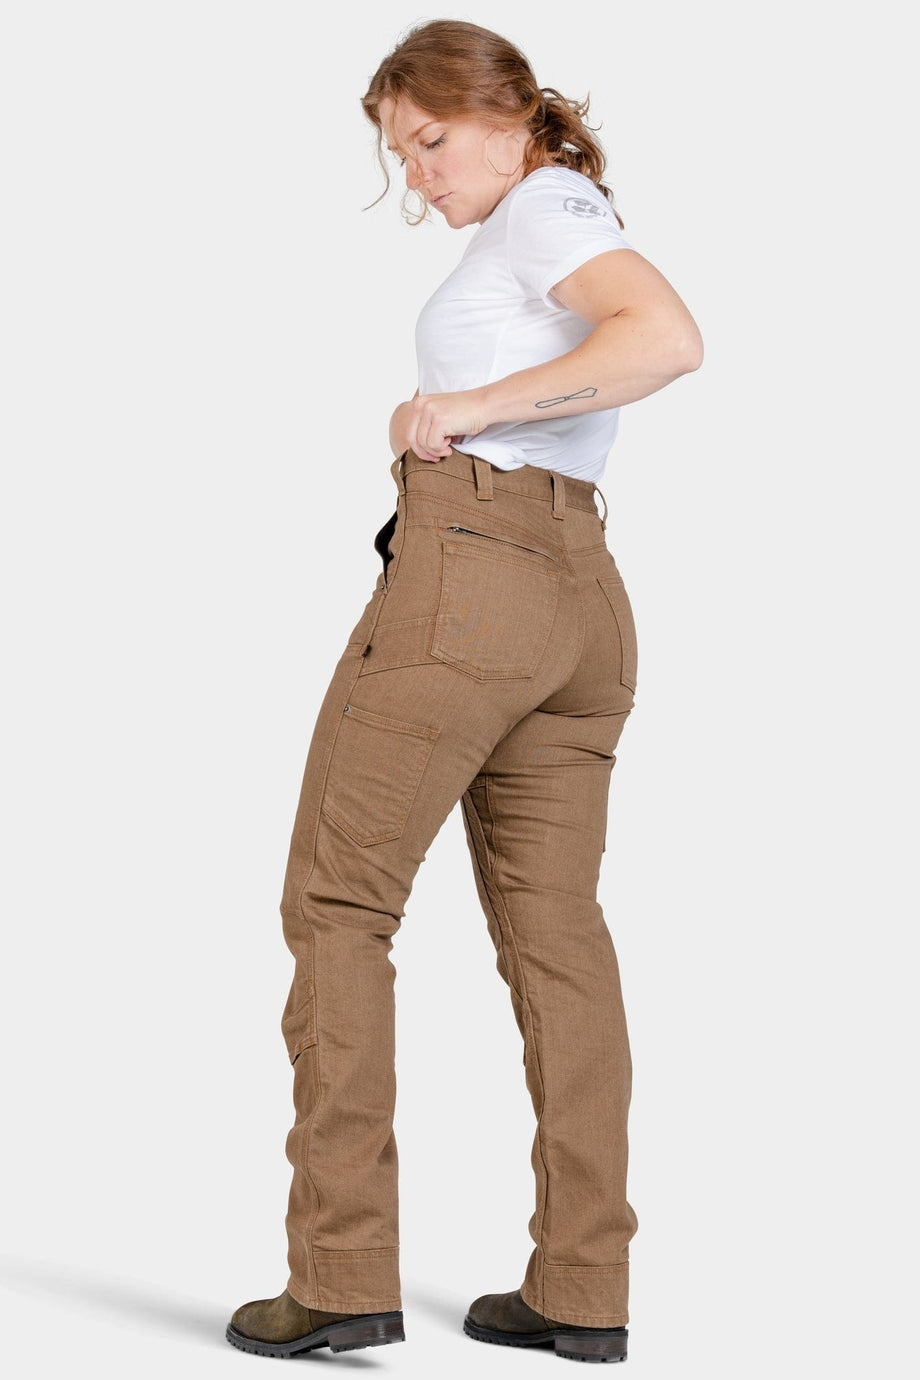 High-Waisted Canvas Wide-Leg Workwear Pants for Women